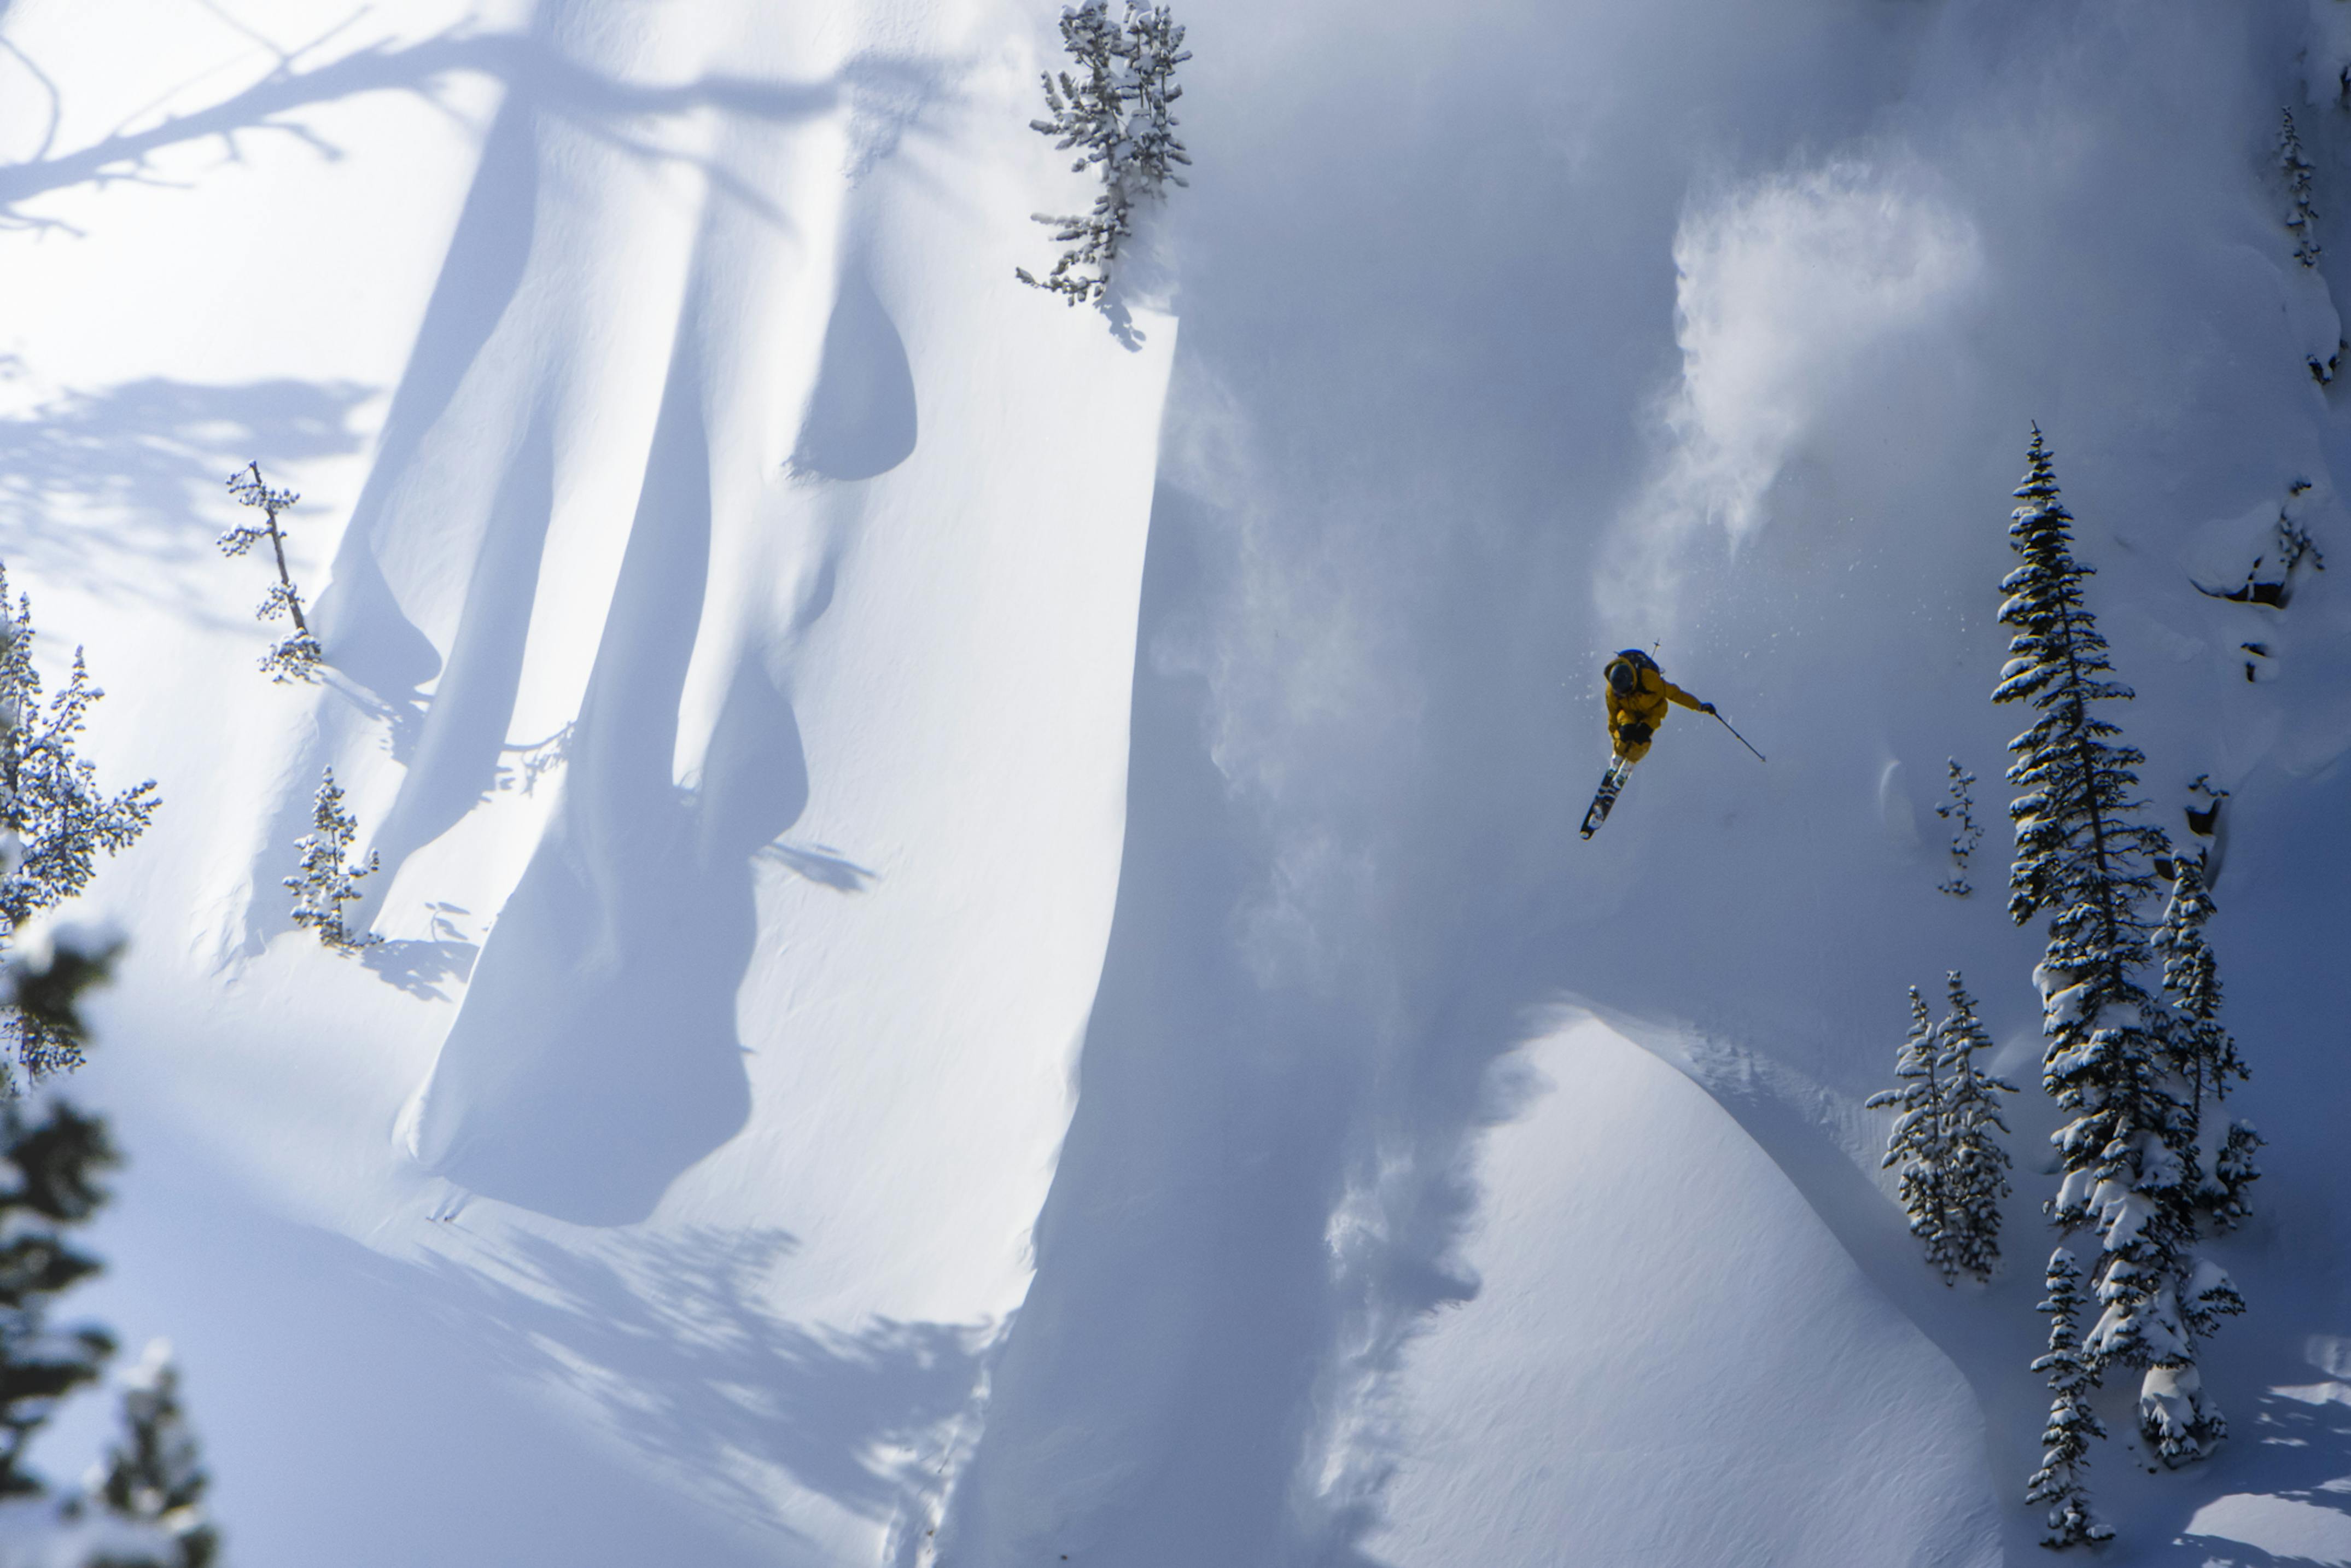 Black Diamond Athlete Parkin Costain skiing in the backcountry